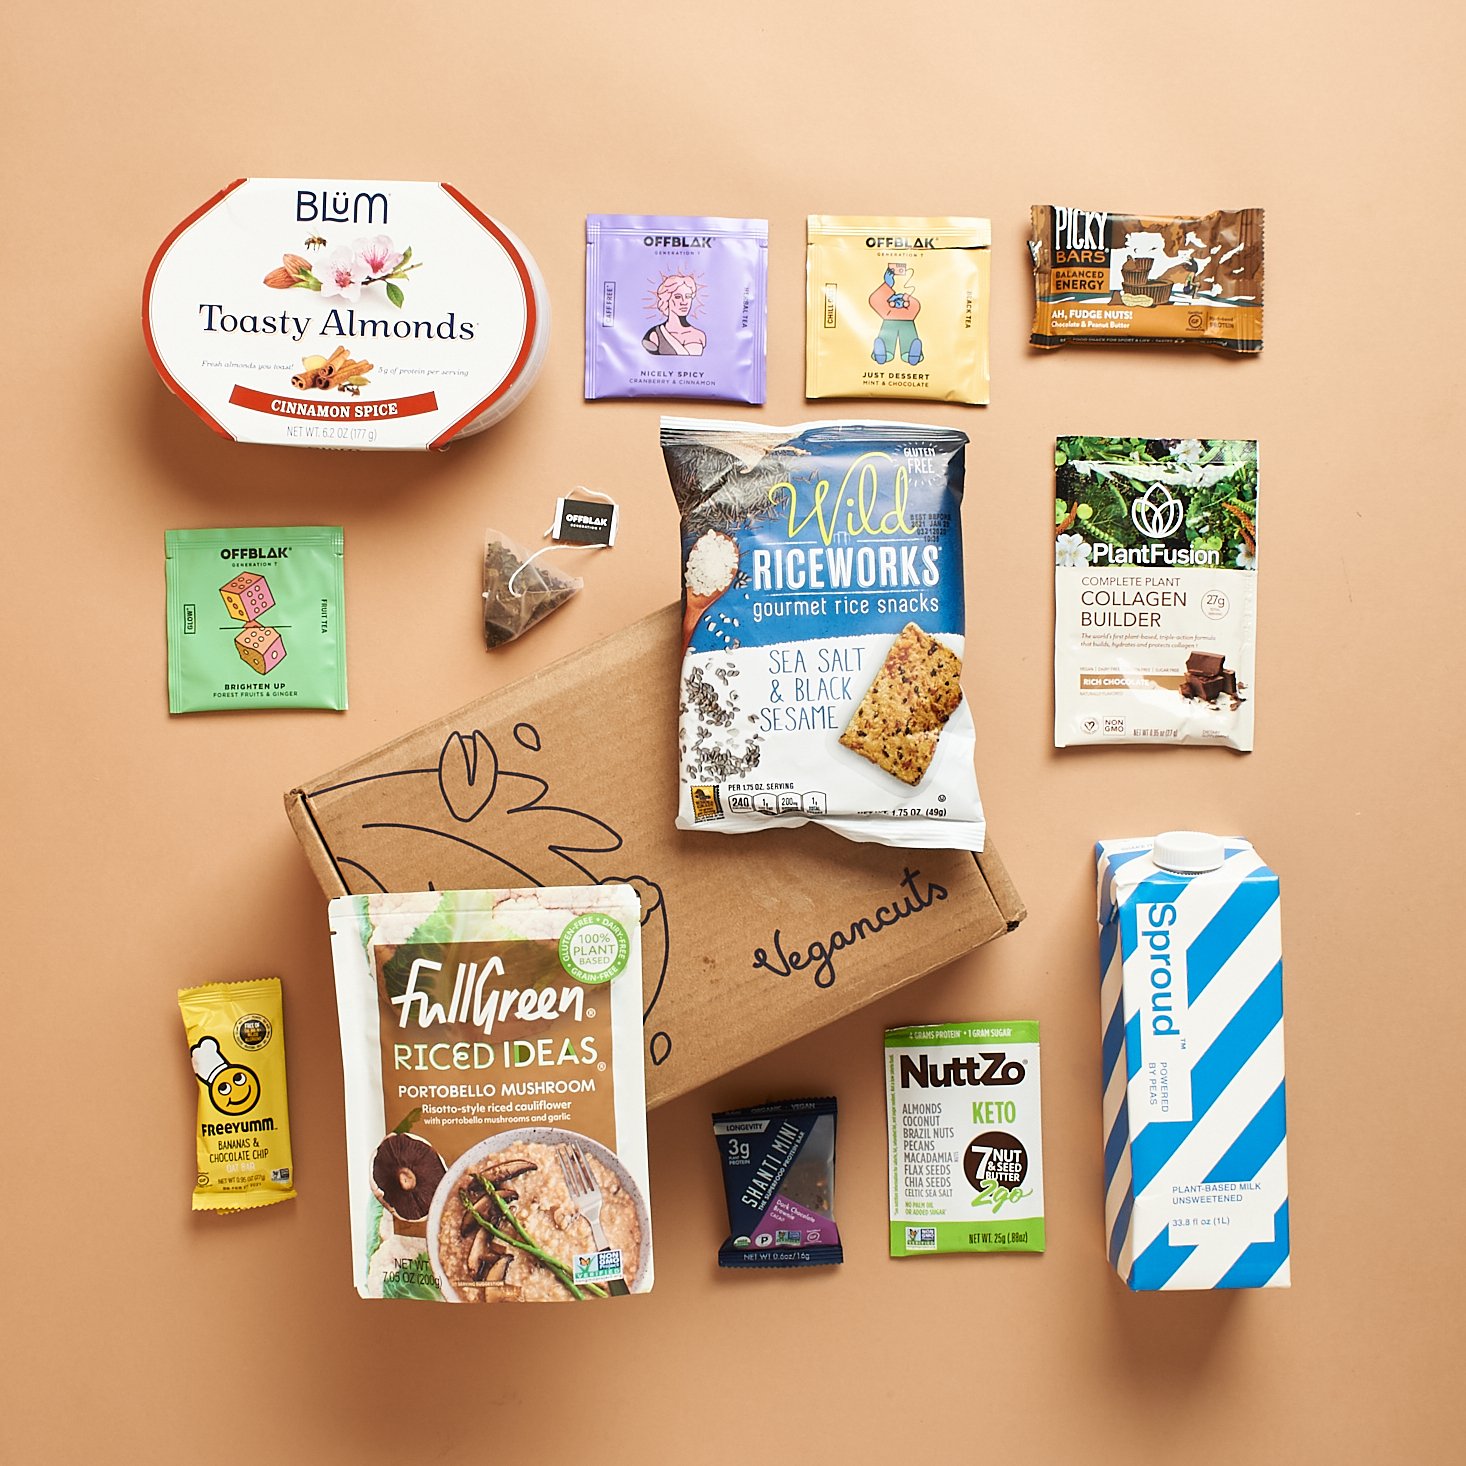 Vegancuts Snacks has a Black Friday 2021 Deal available now – Get up to $75 off